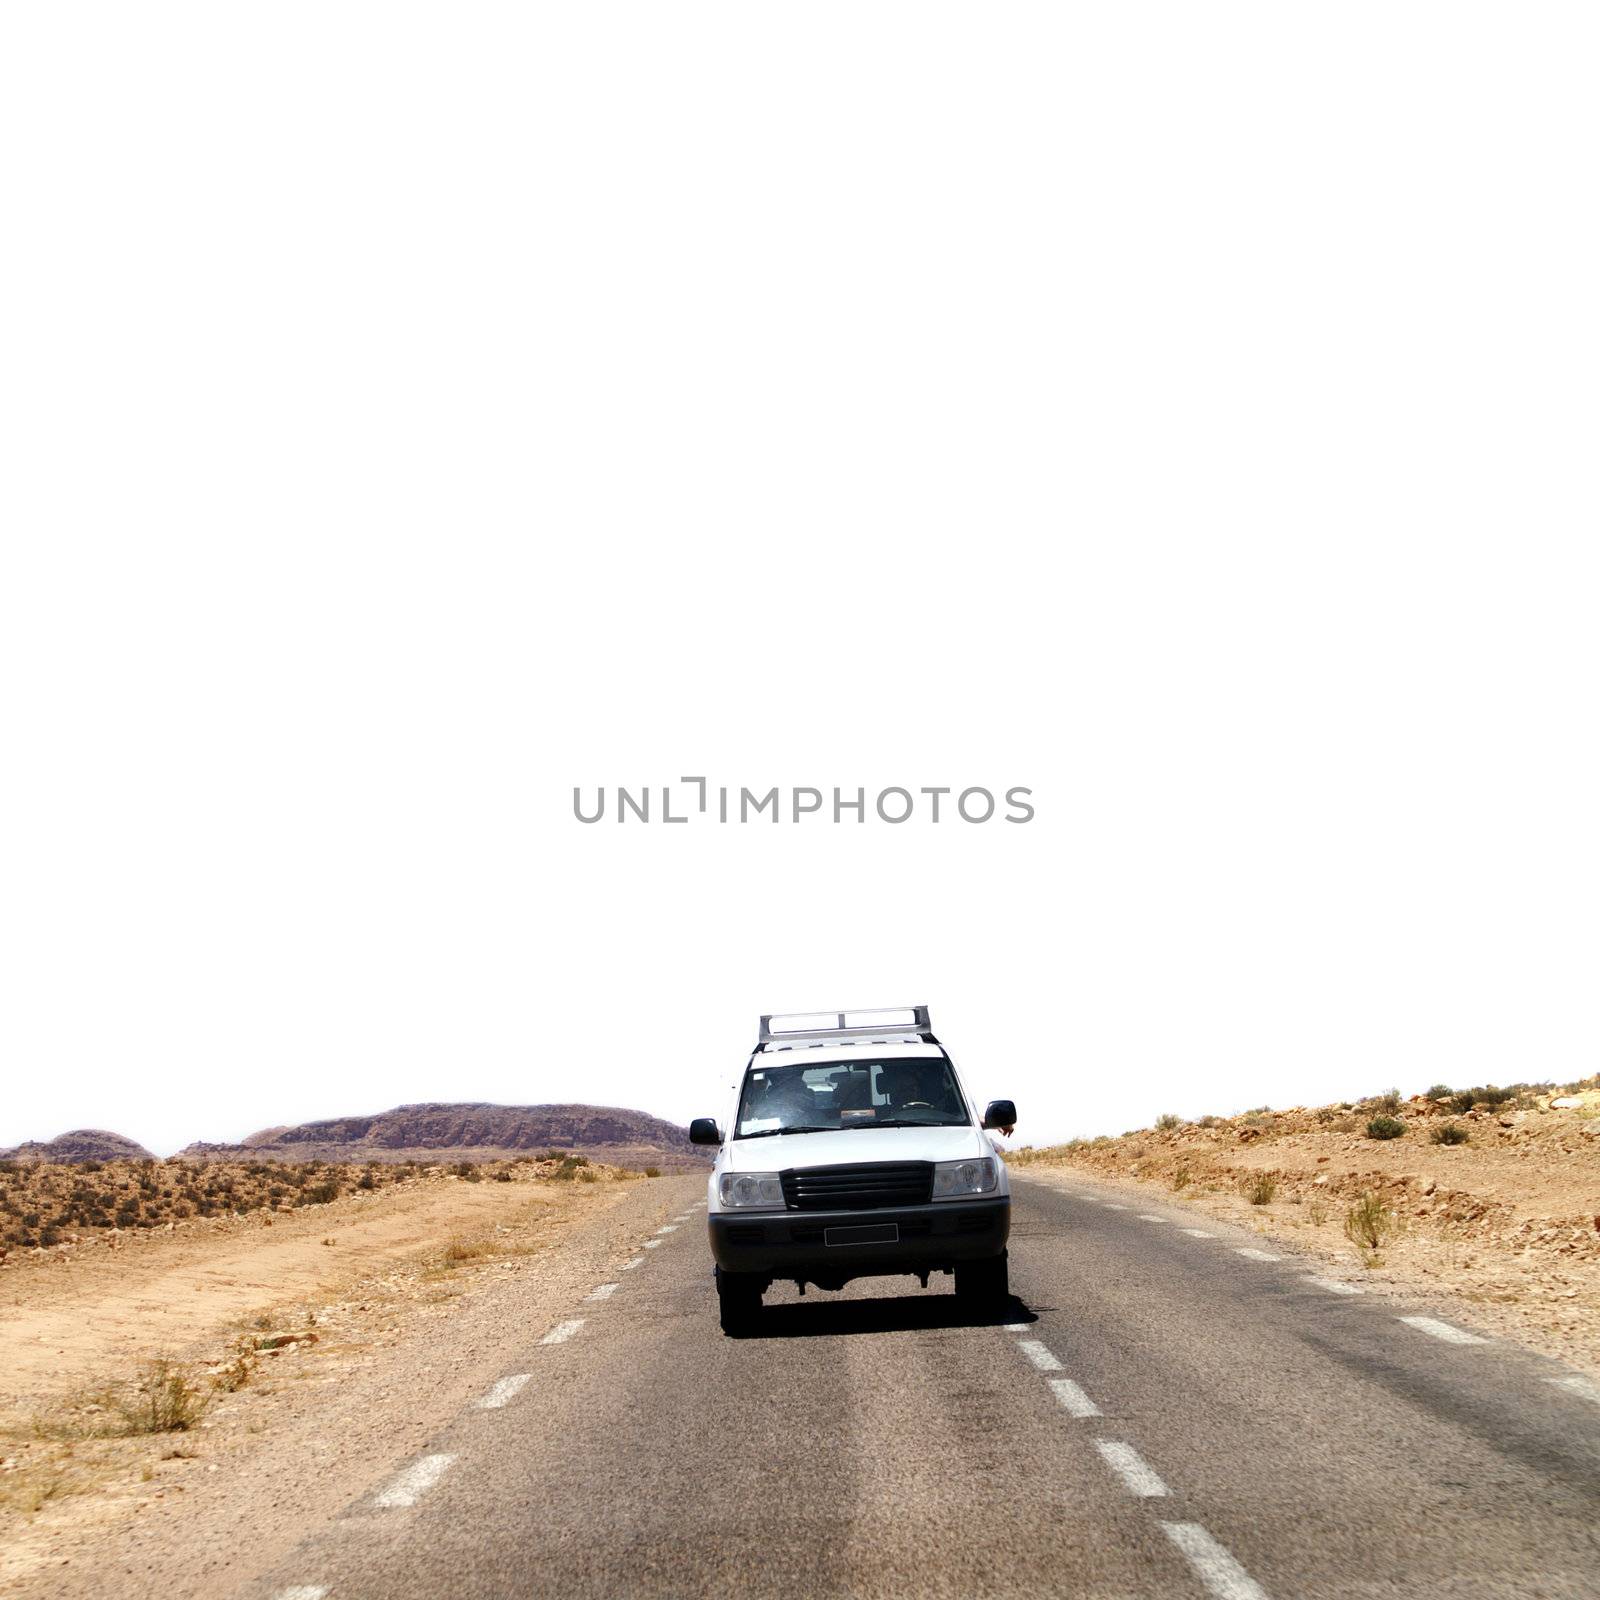 Jeep safari through the deserts of Africa by photochecker